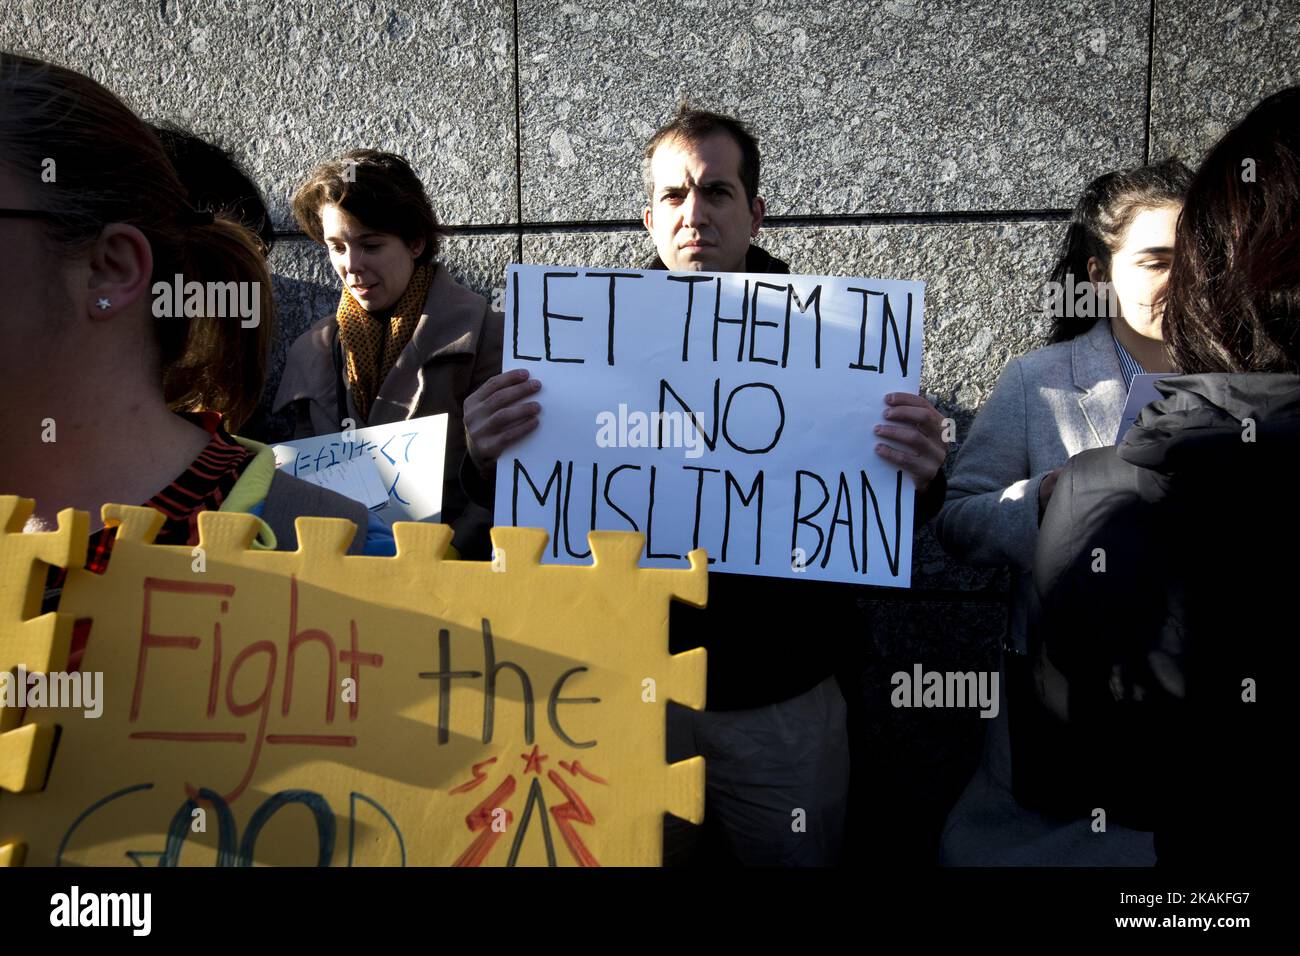 Foreign residents of Tokyo gather to protest against U.S President Donald TrumpÂ’s immigration ban and security agendas near US embassy of Tokyo, Japan on January 31, 2017. U.S. President Trump issued a executive order banning seven Muslim nations, Iraq, Syria, Iran, Sudan, Libya, Somalia or Yemen from entering the United States. Several travelers with visas to the United States were detained at JFK airport the past few days. (Photo by Richard Atrero de Guzman/NurPhoto) *** Please Use Credit from Credit Field *** Stock Photo